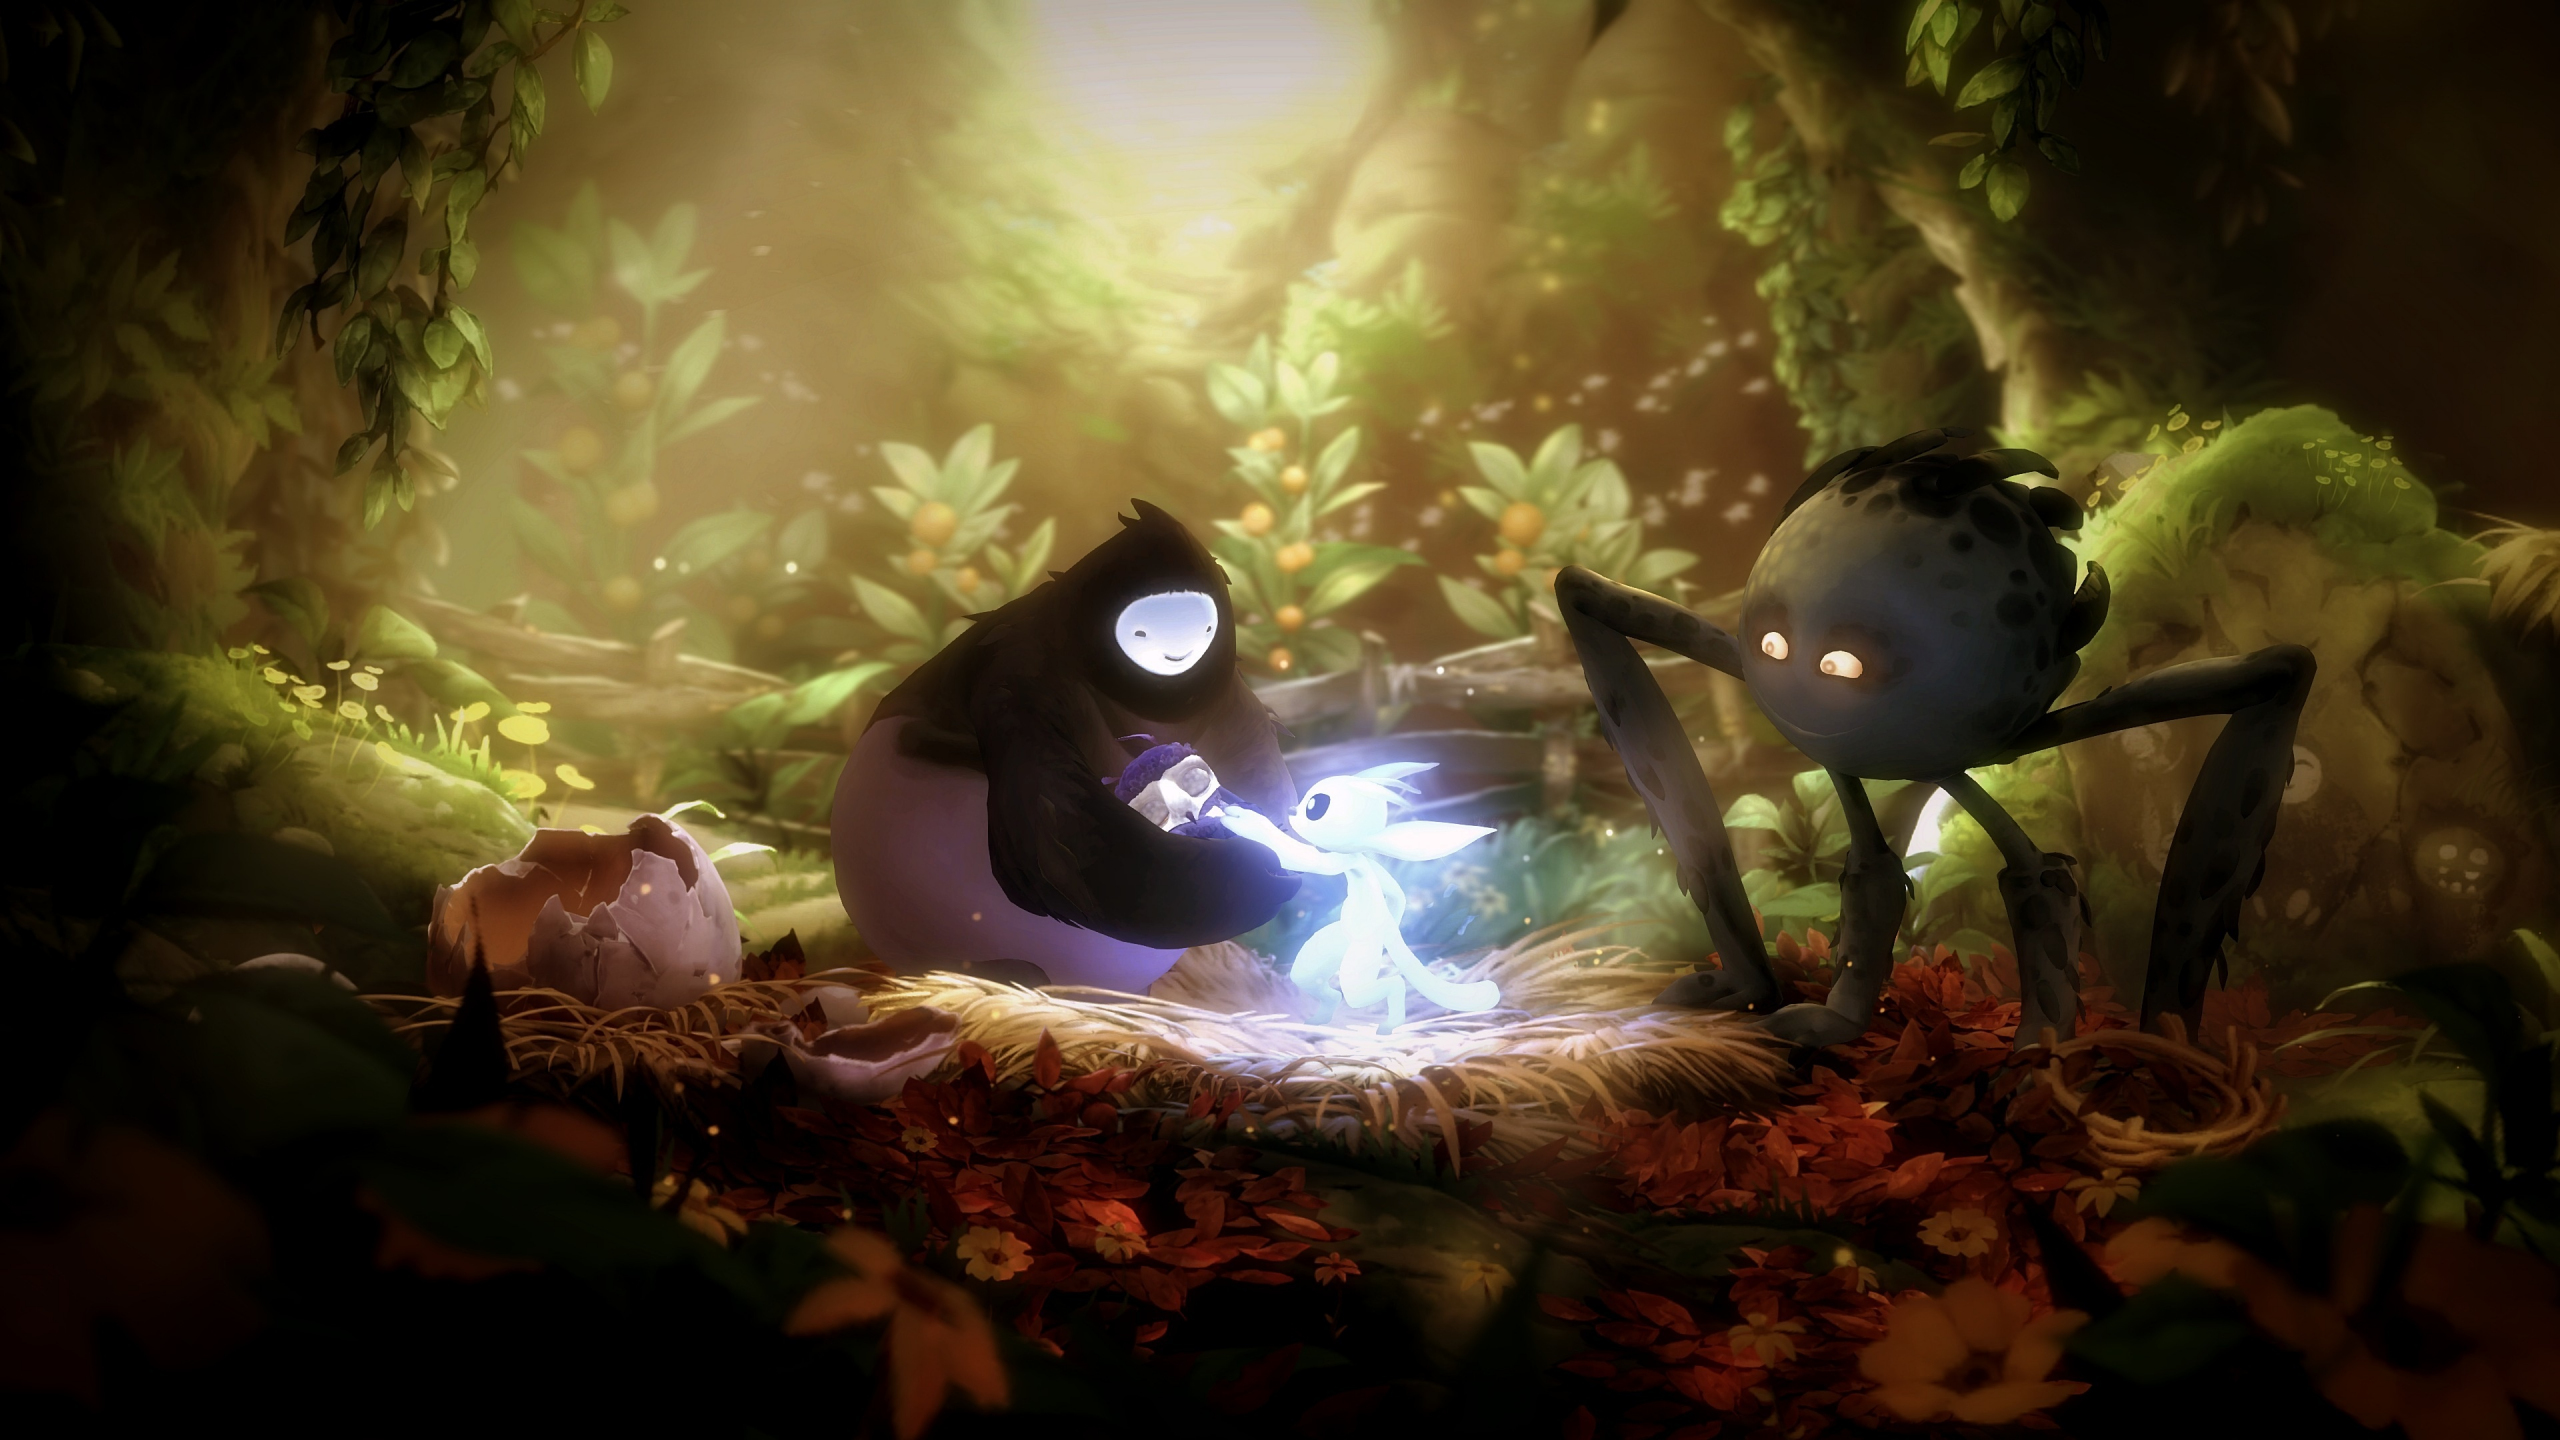 Download wallpaper 2560x1440 ori and the will of he wisps, game, e3 2018,  dual wide 16:9 2560x1440 hd background, 9122